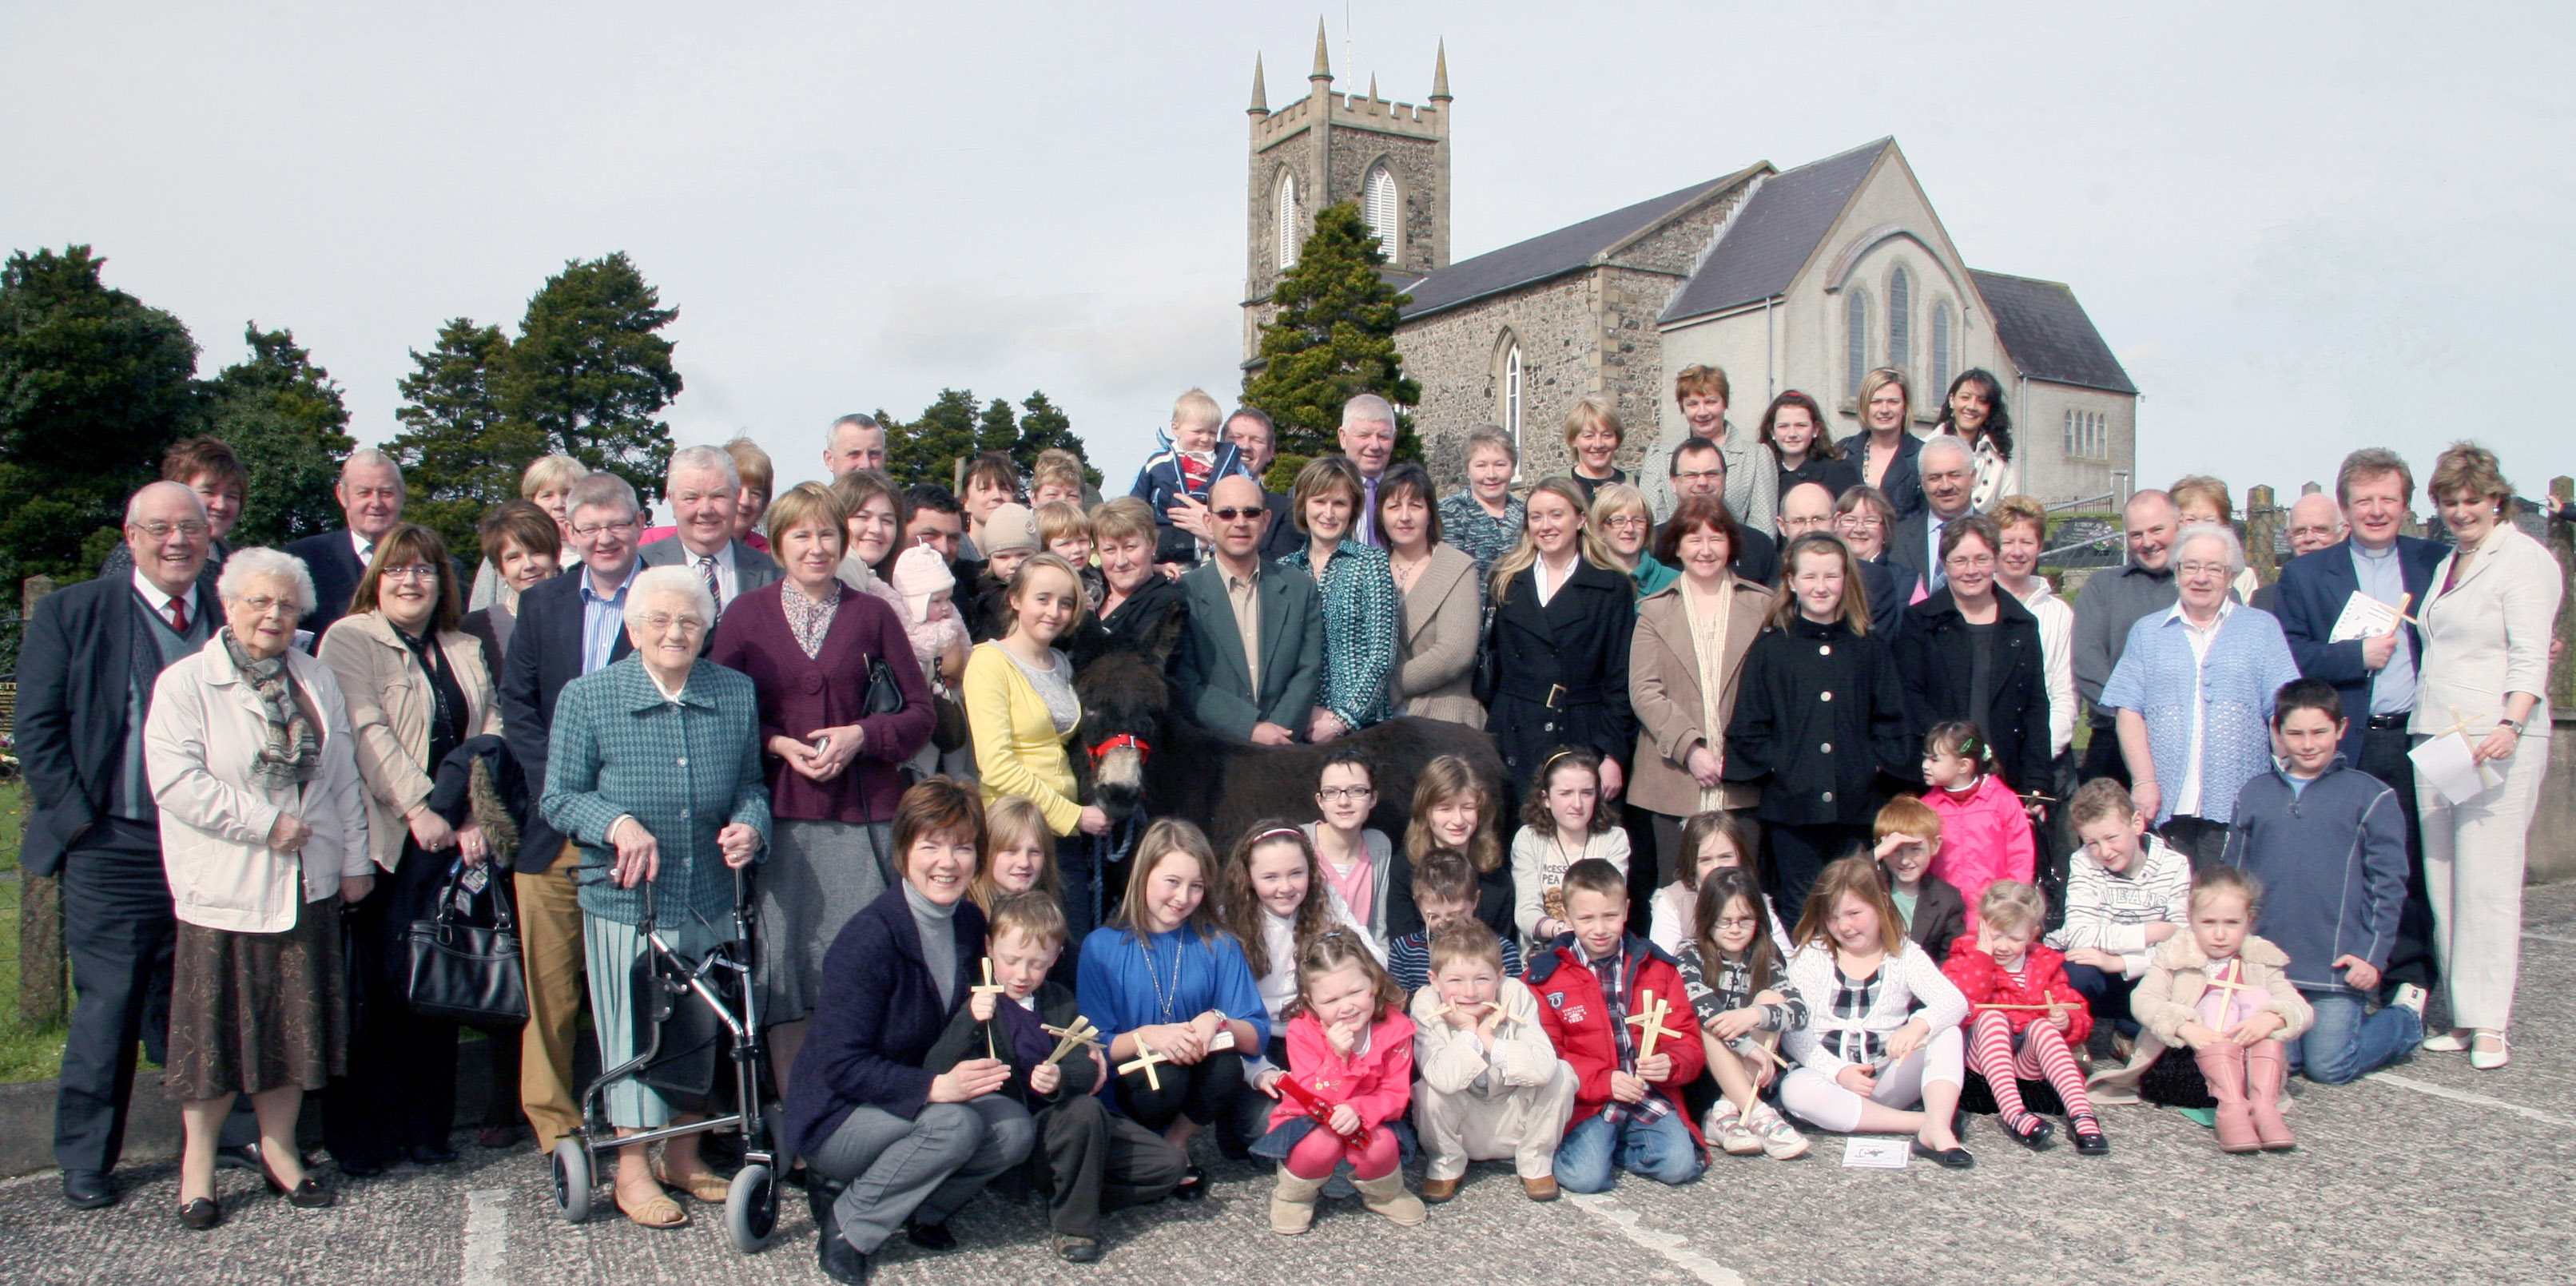 Magheragall parishioners pictured with Laura Roberts and her donkey Claud at the Palm Sunday services at Magheragall Parish Church.